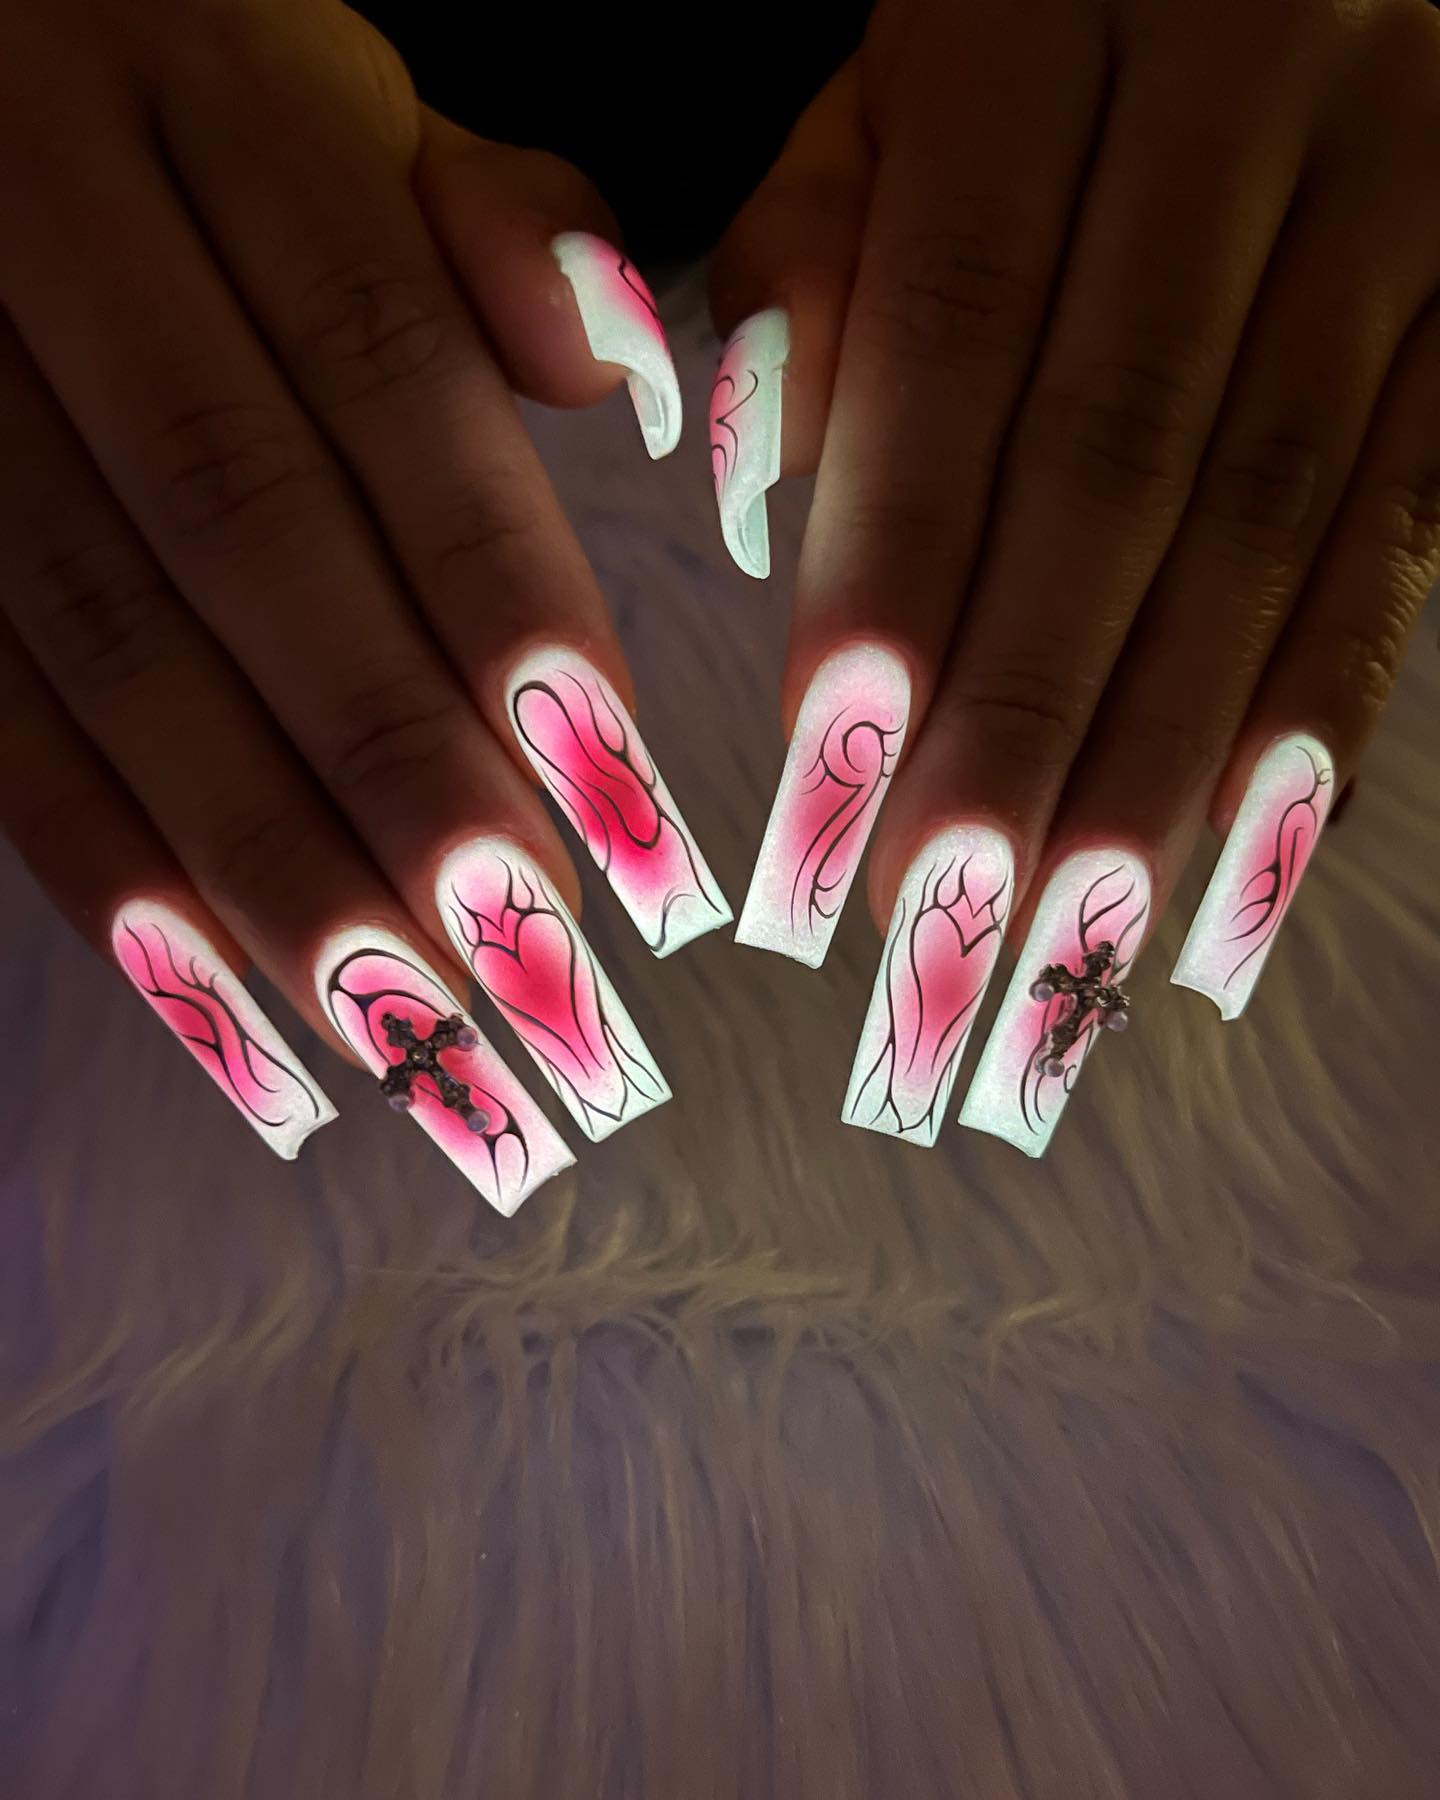 Glow in the Dark Nail Designs